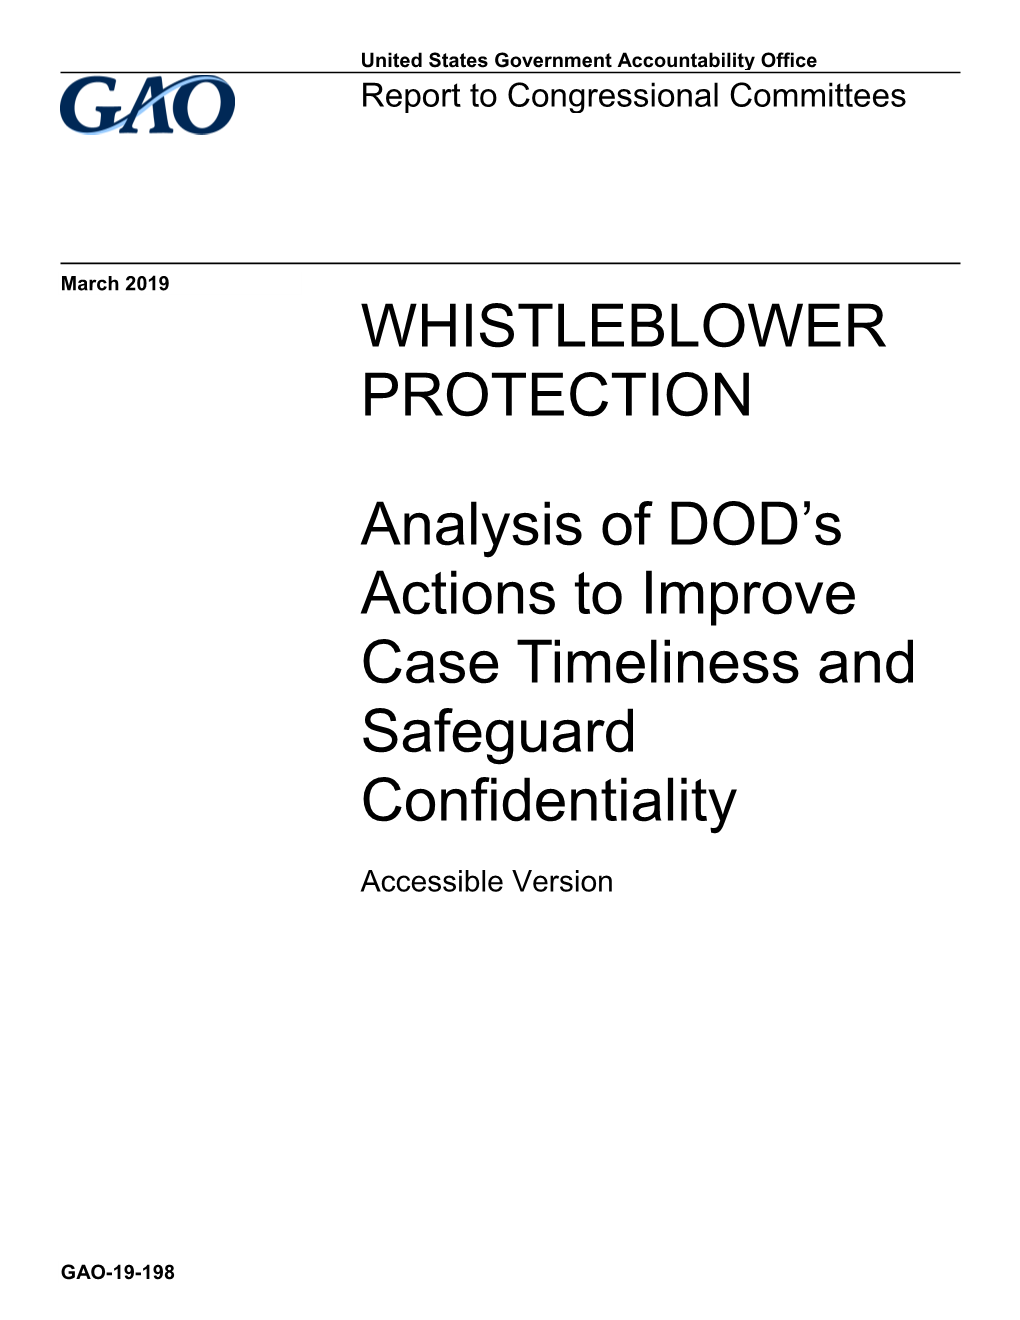 Analysis of DOD's Actions to Improve Case Timeliness and Safeguard Confidentiality